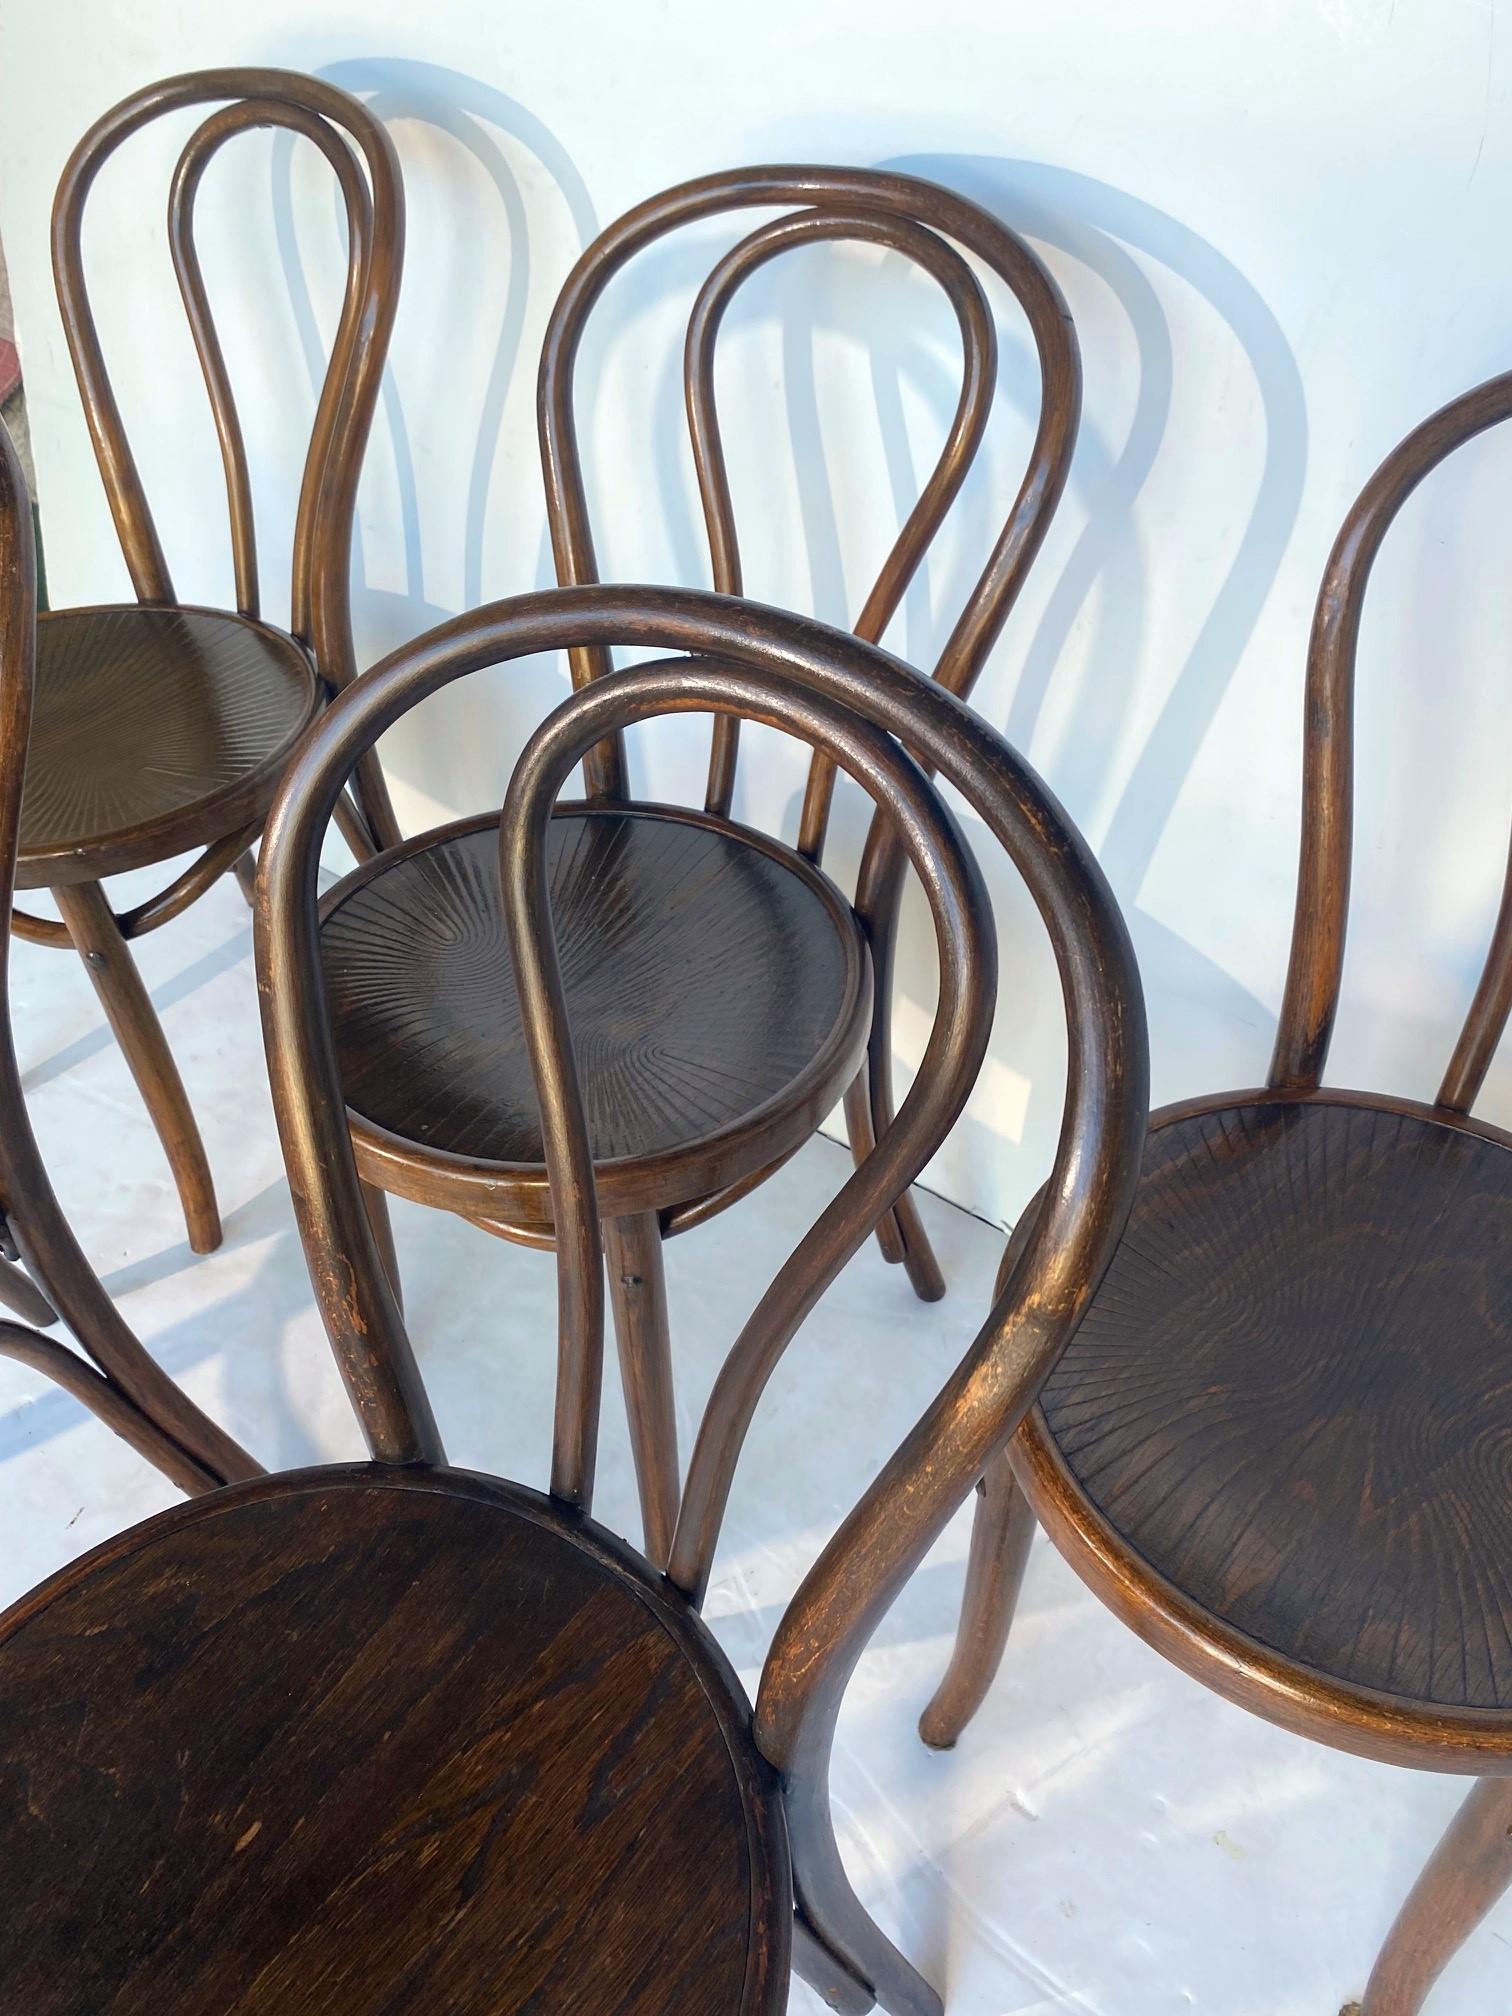 A set of six vintage bentwood-style dining chairs.